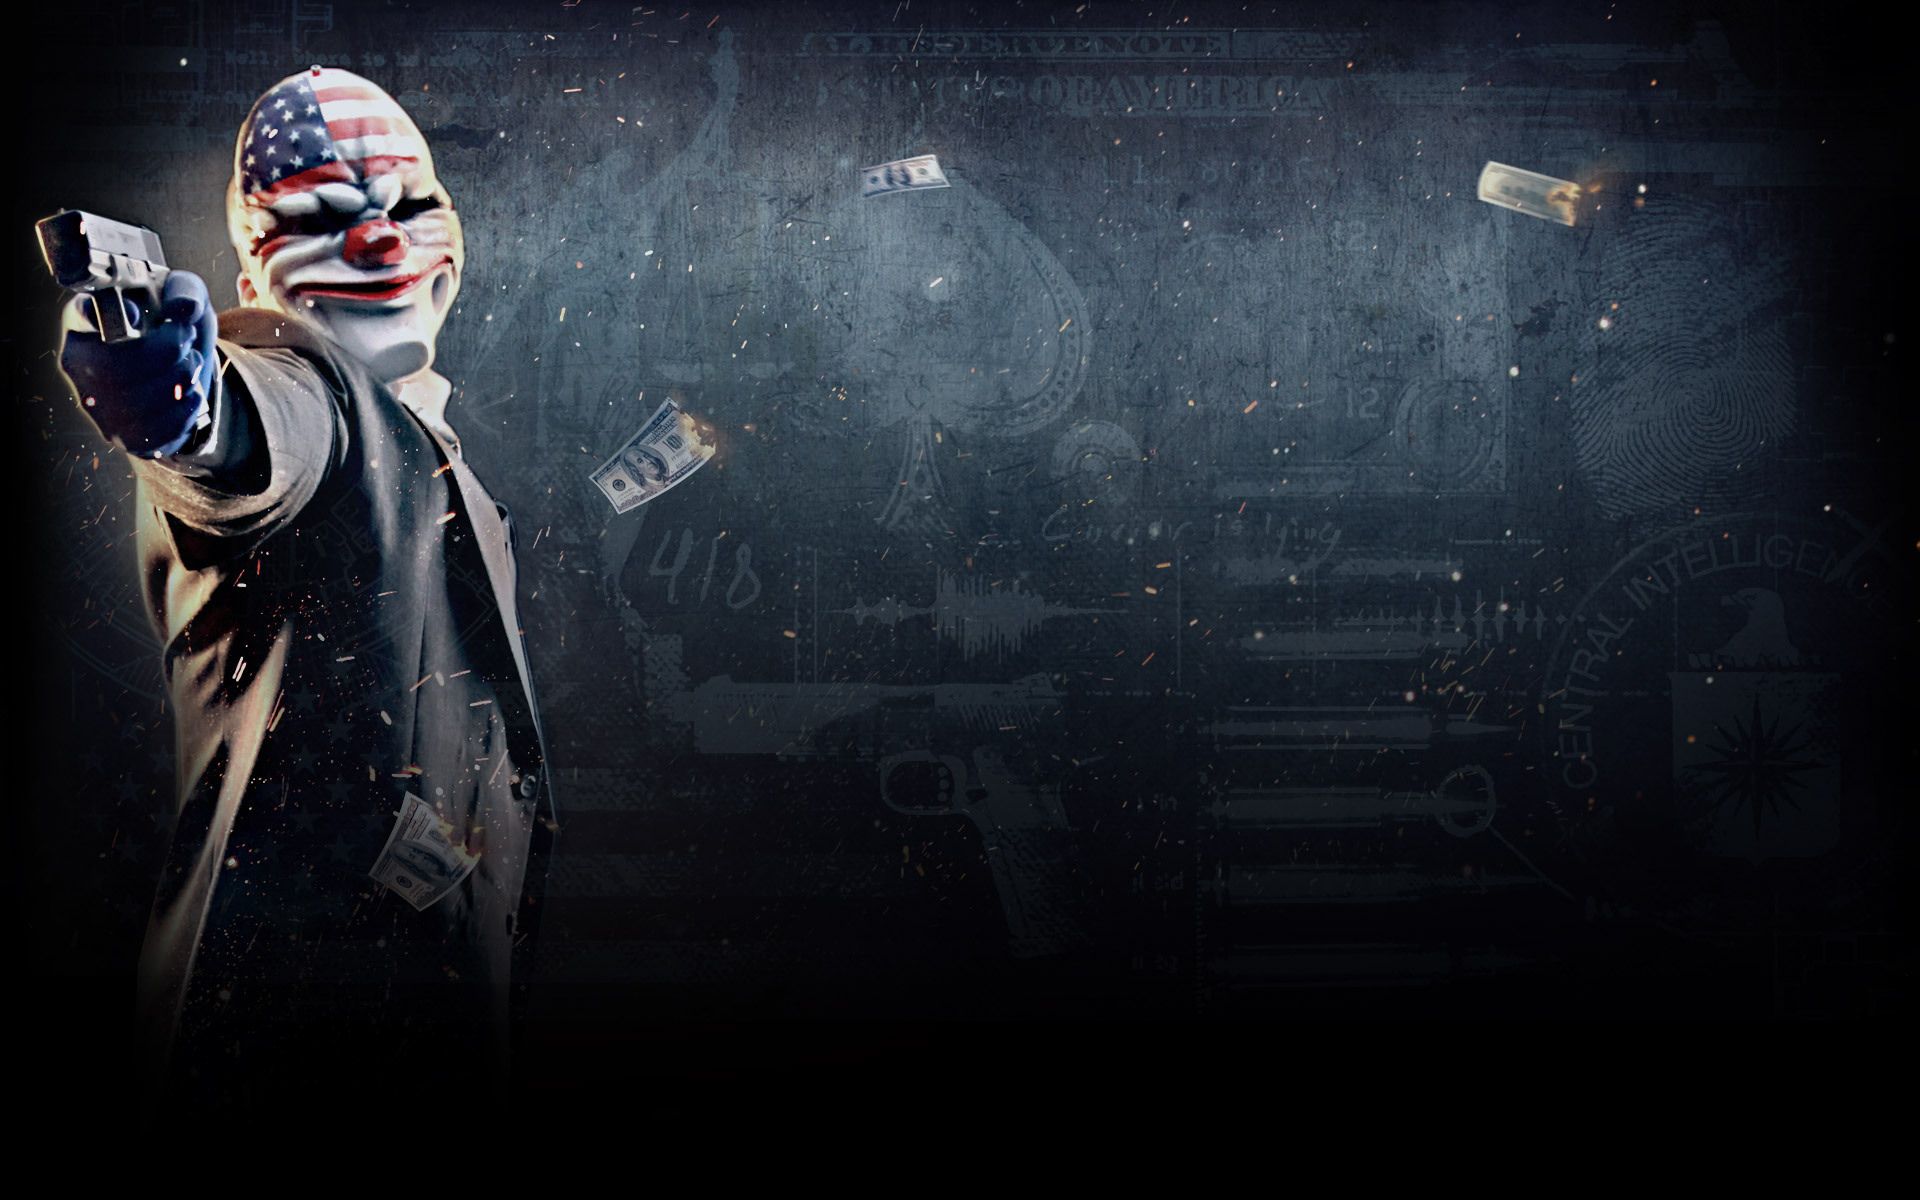 Payday 2 Picture